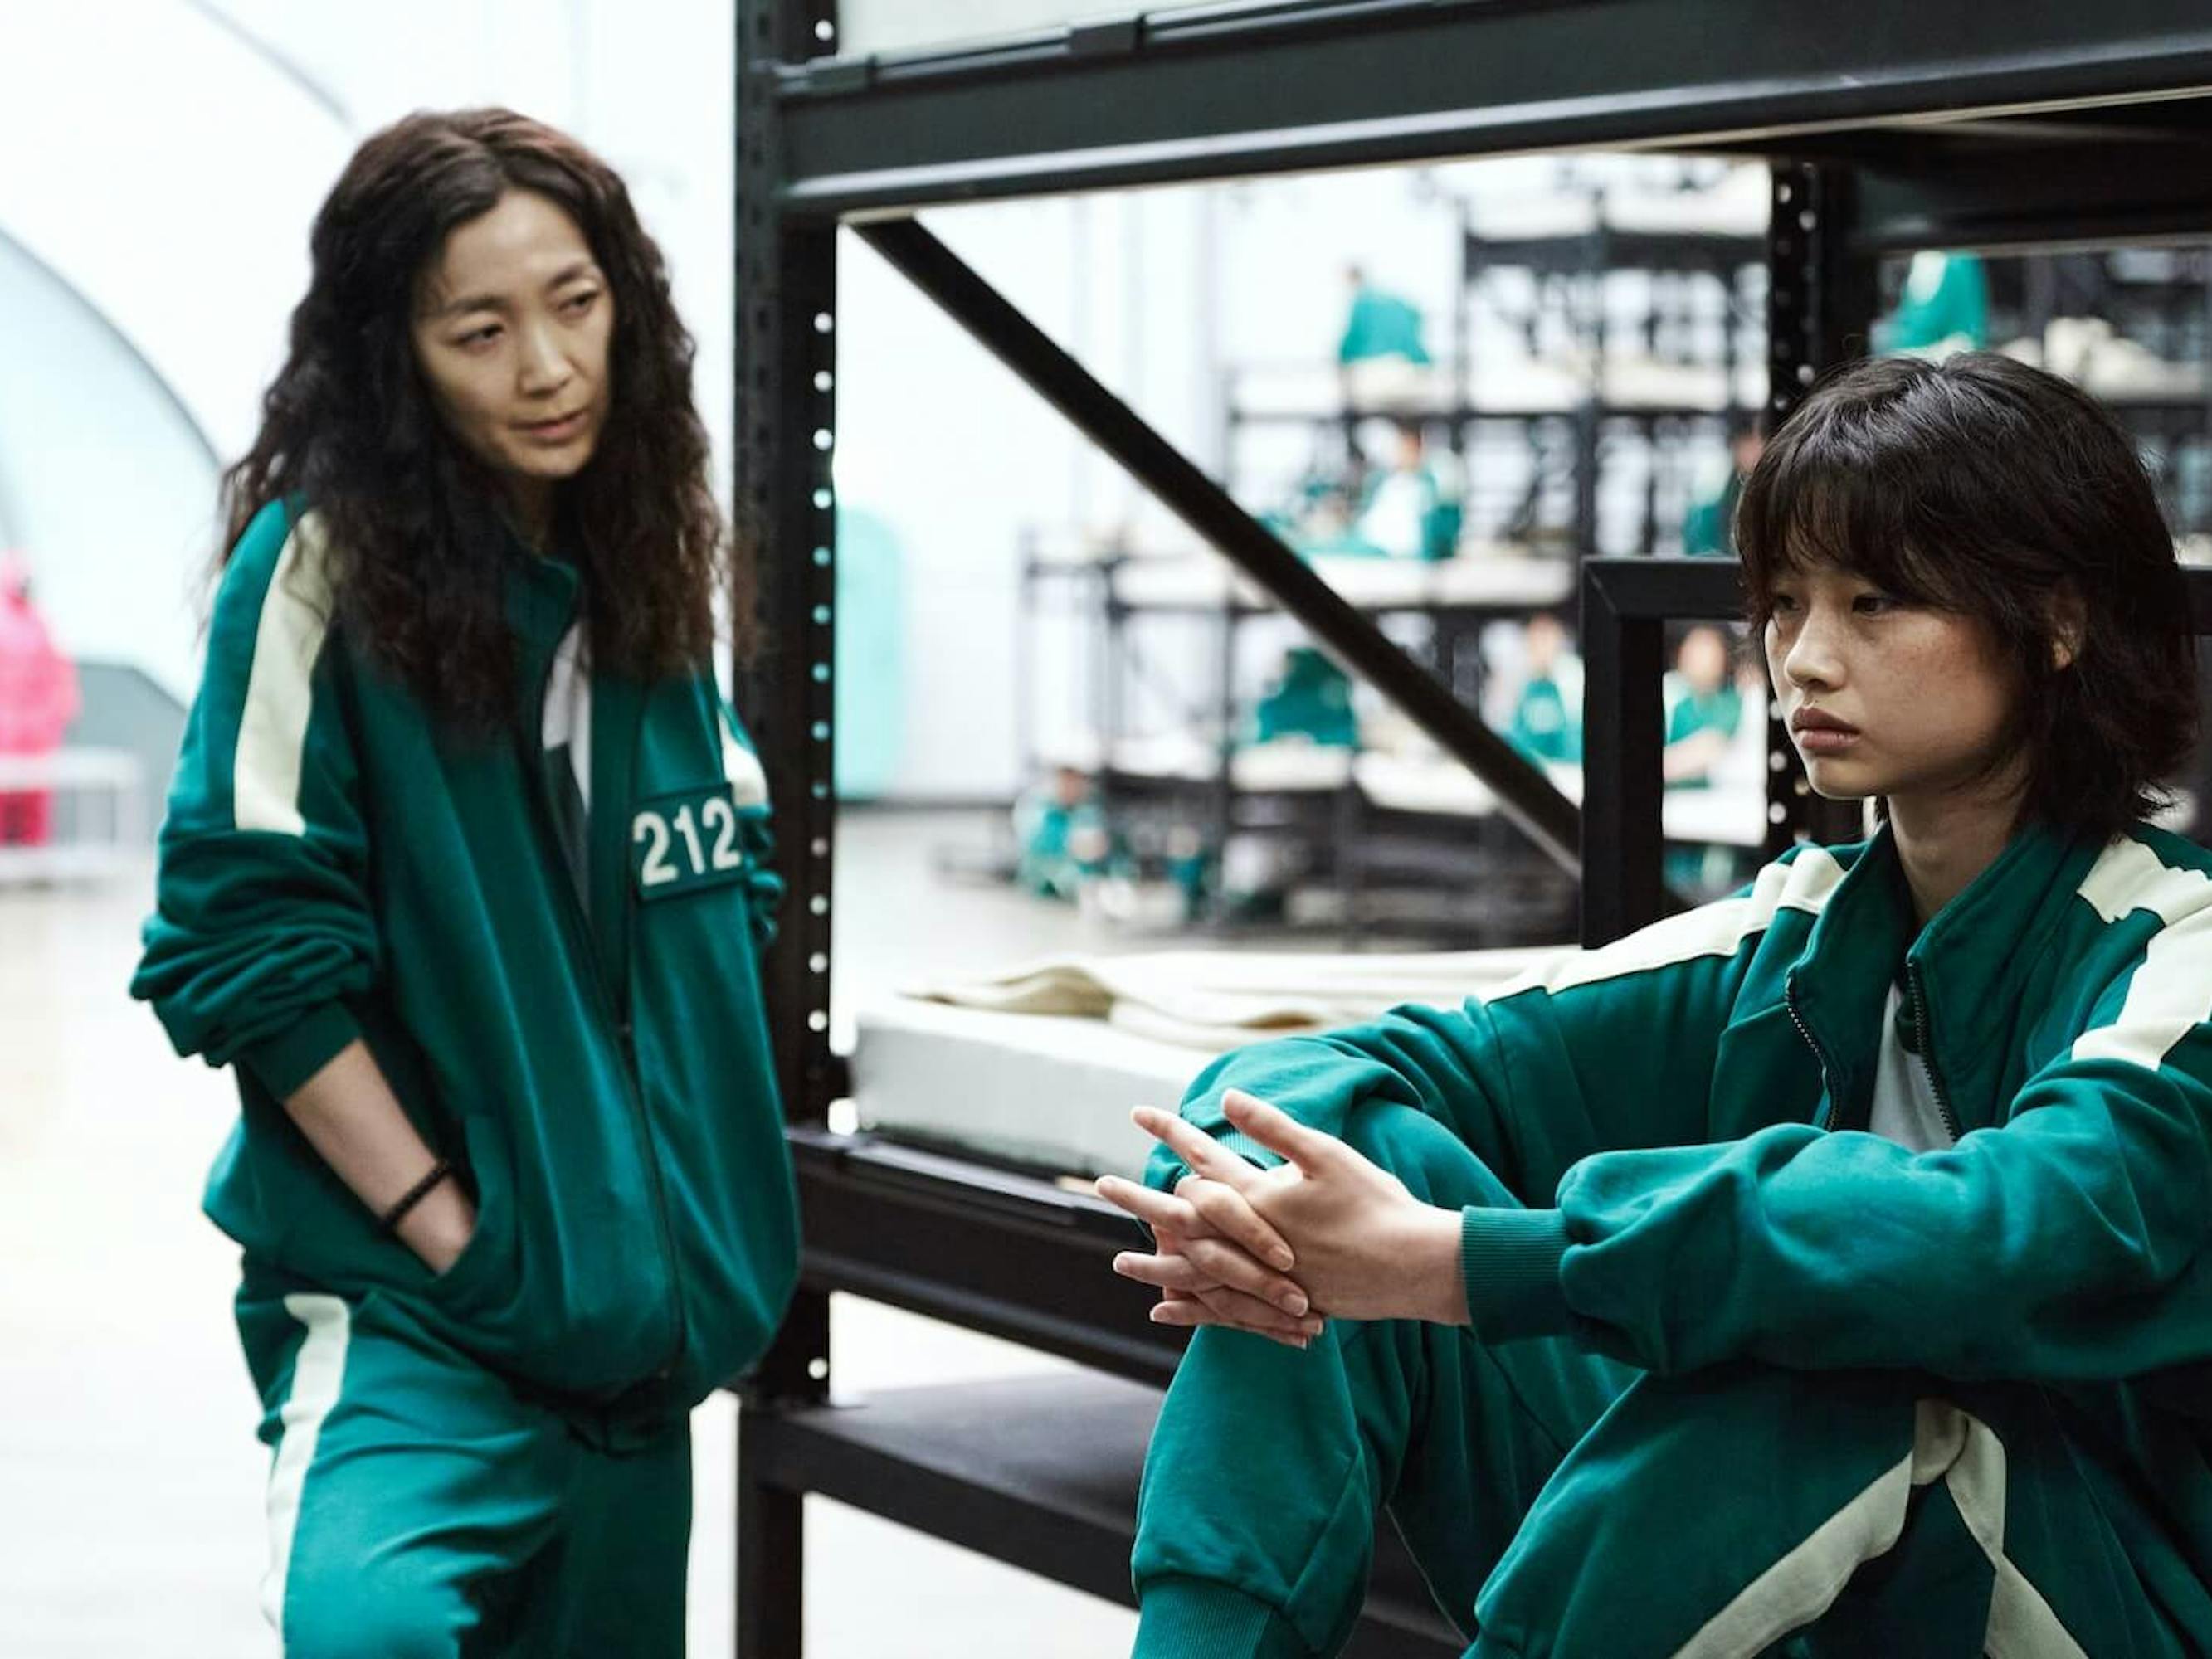 Mi-nyeo (Kim Joo-ryoung) and Sae-byeok (Jung Ho-yeon) stand in an industrial looking warehouse in their green tracksuits.